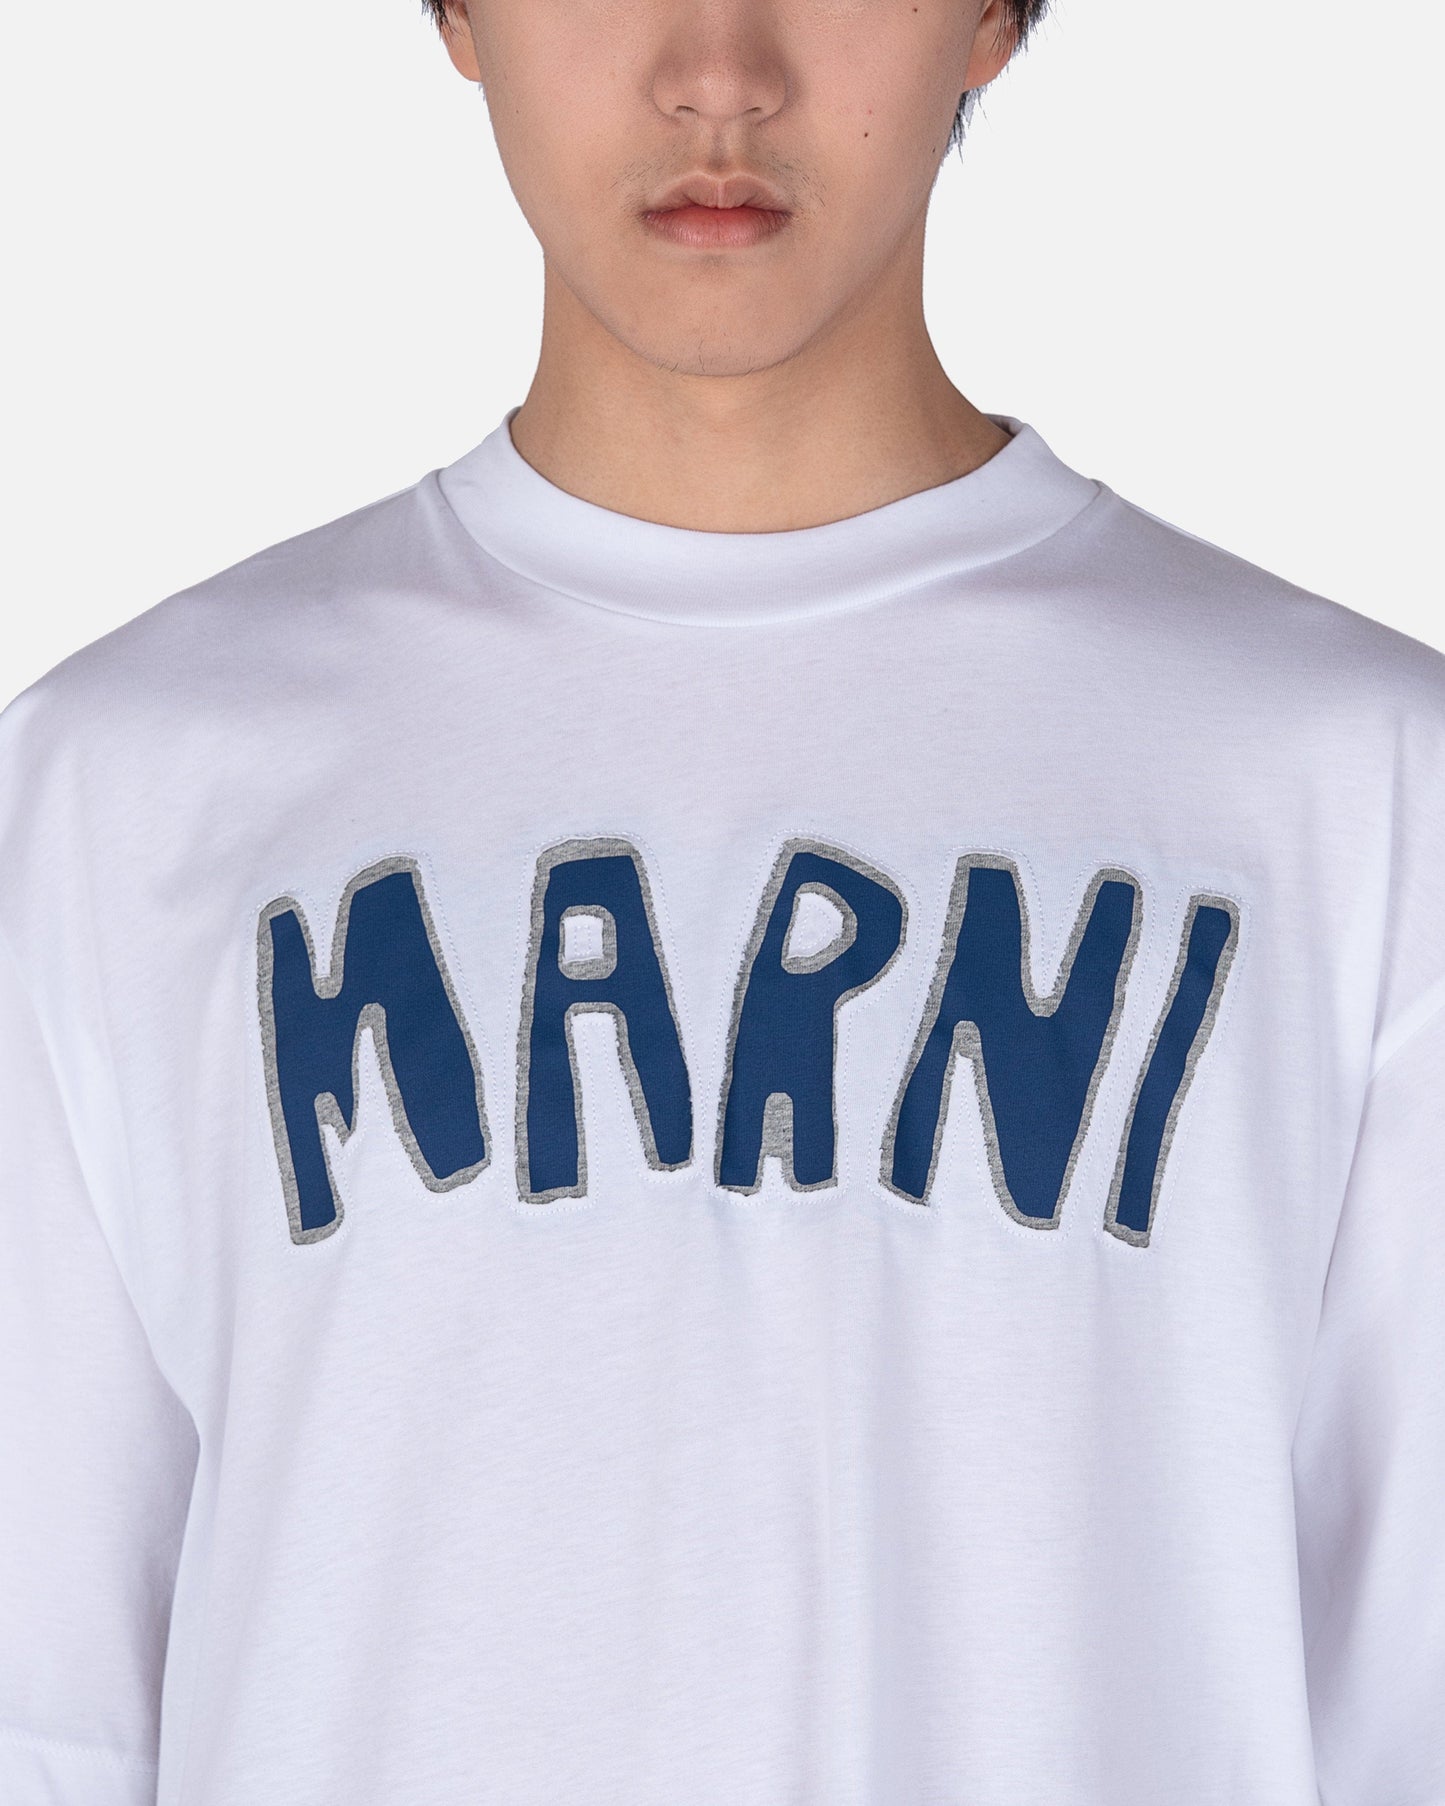 Marni Men's T-Shirts Cut Out Logo T-Shirt in Lily White